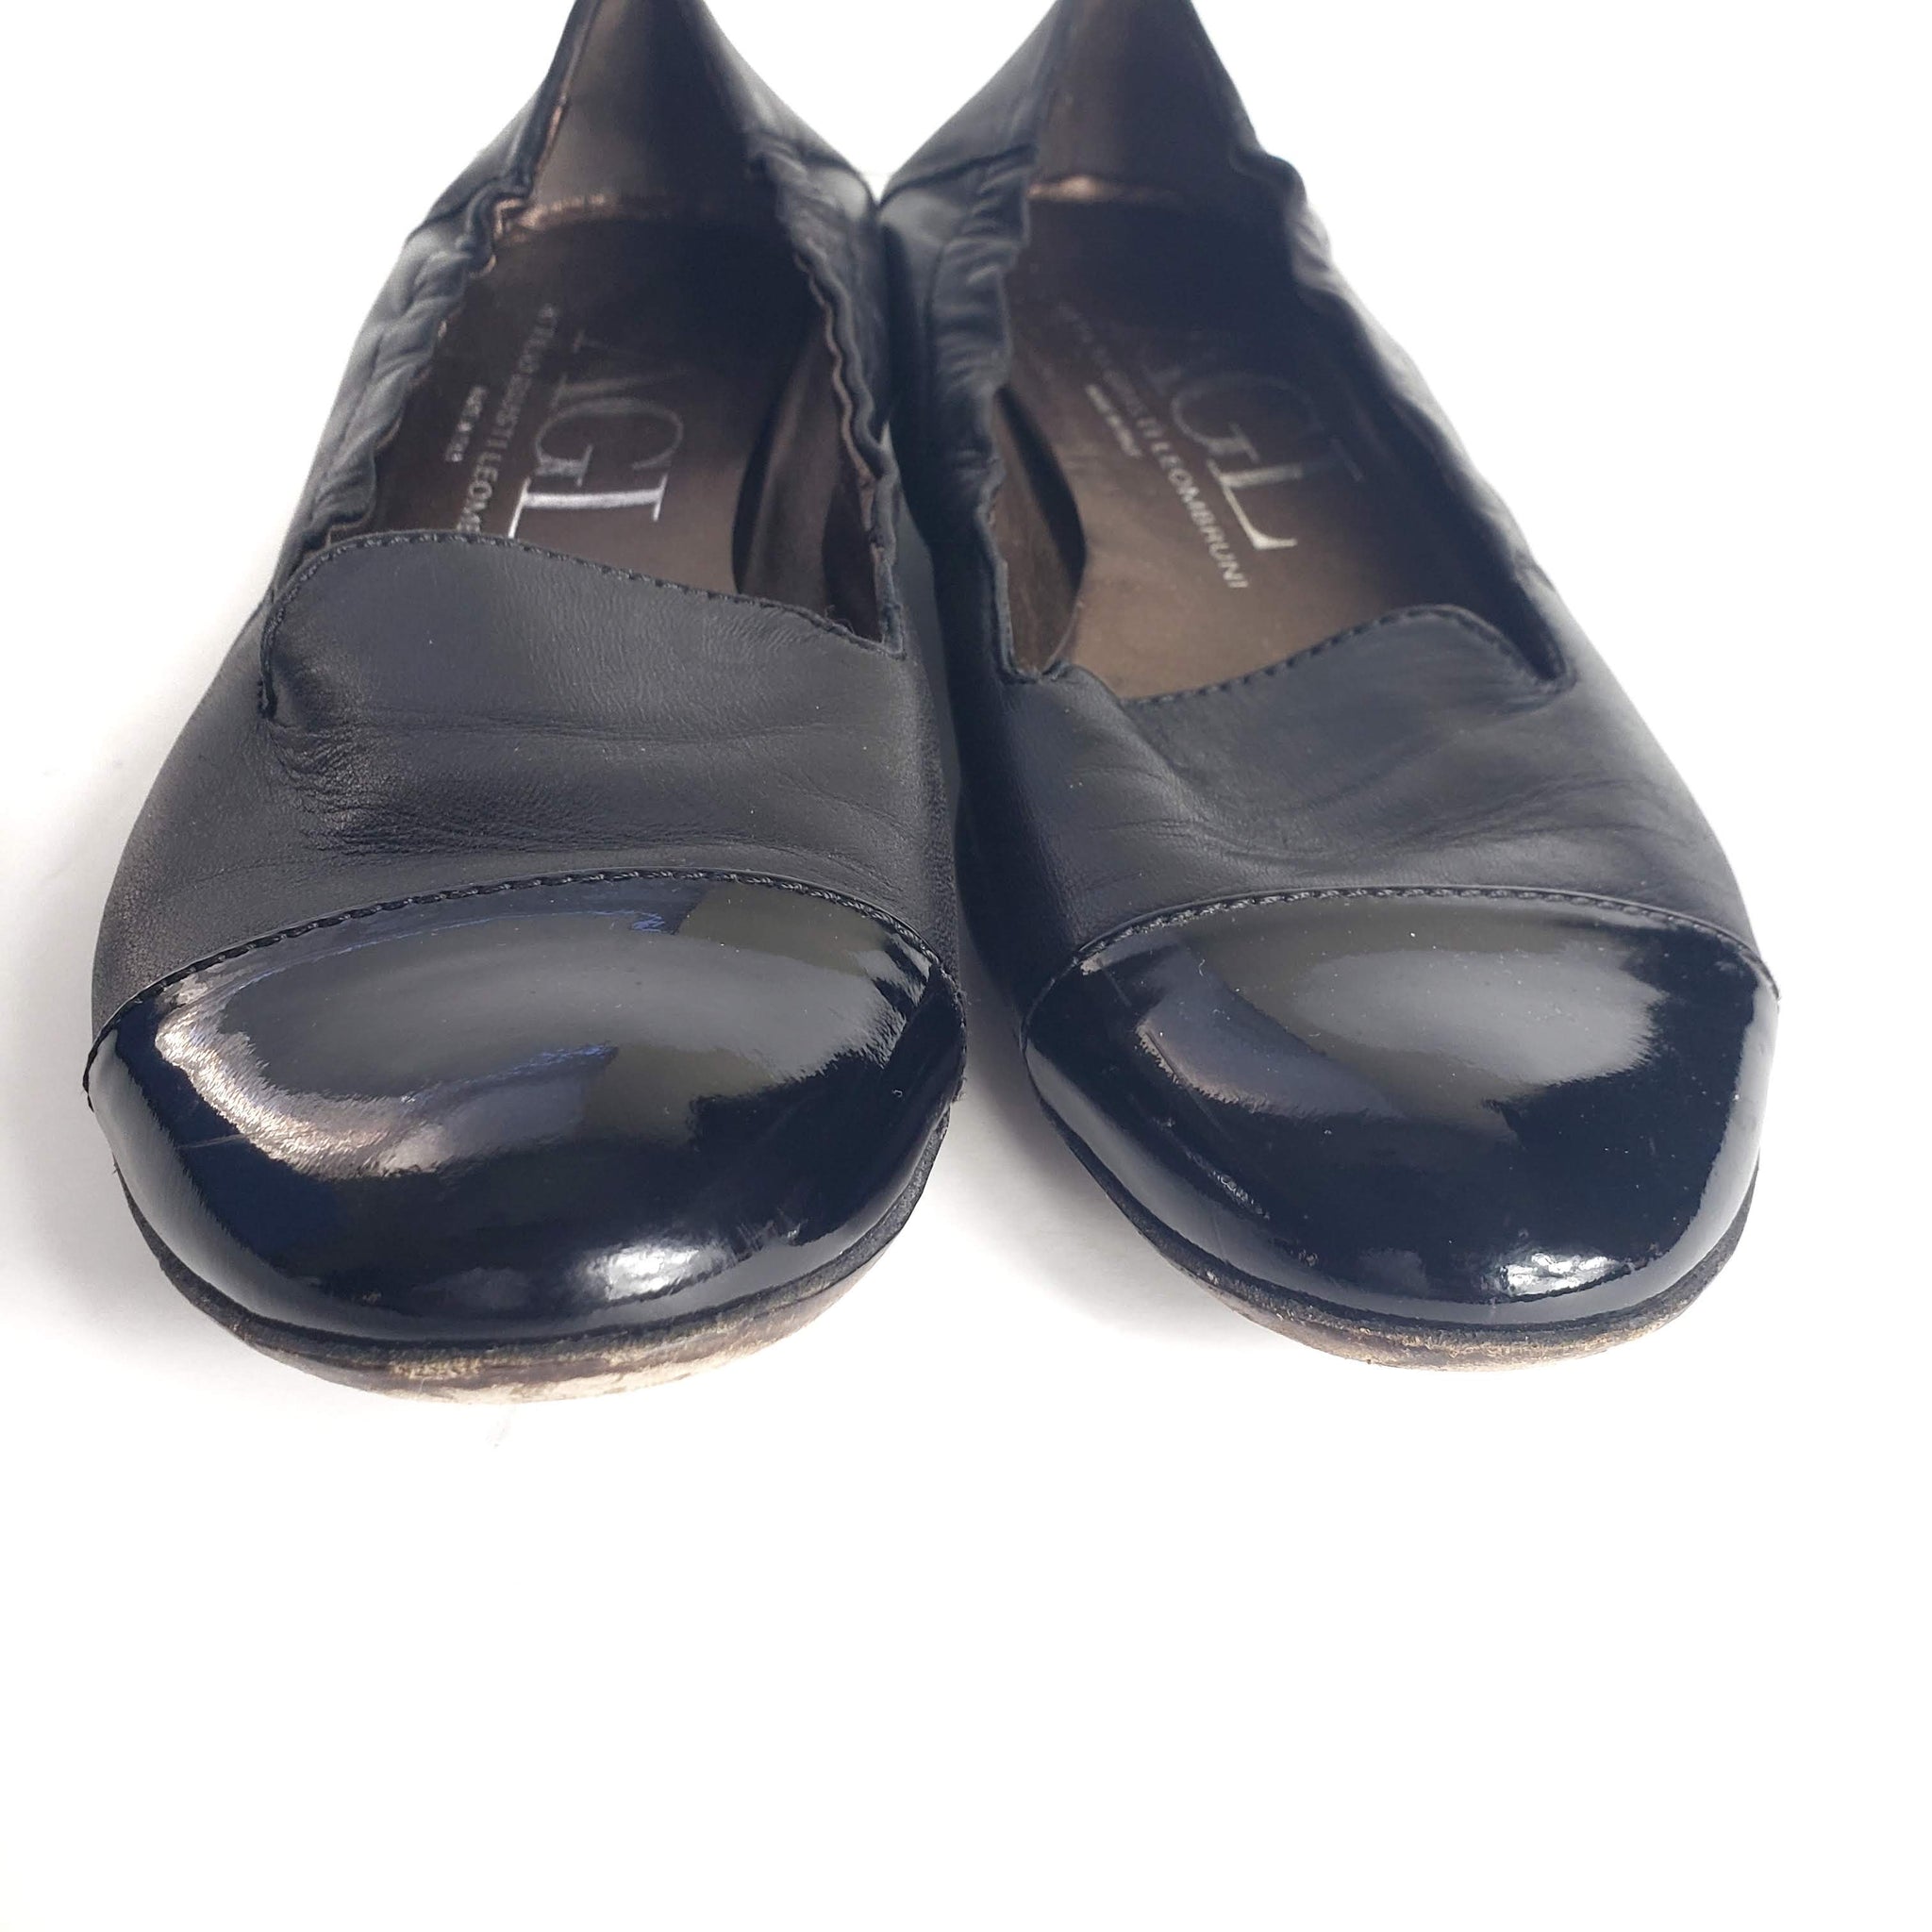 AGL Smoking Flats Loafers Size 8